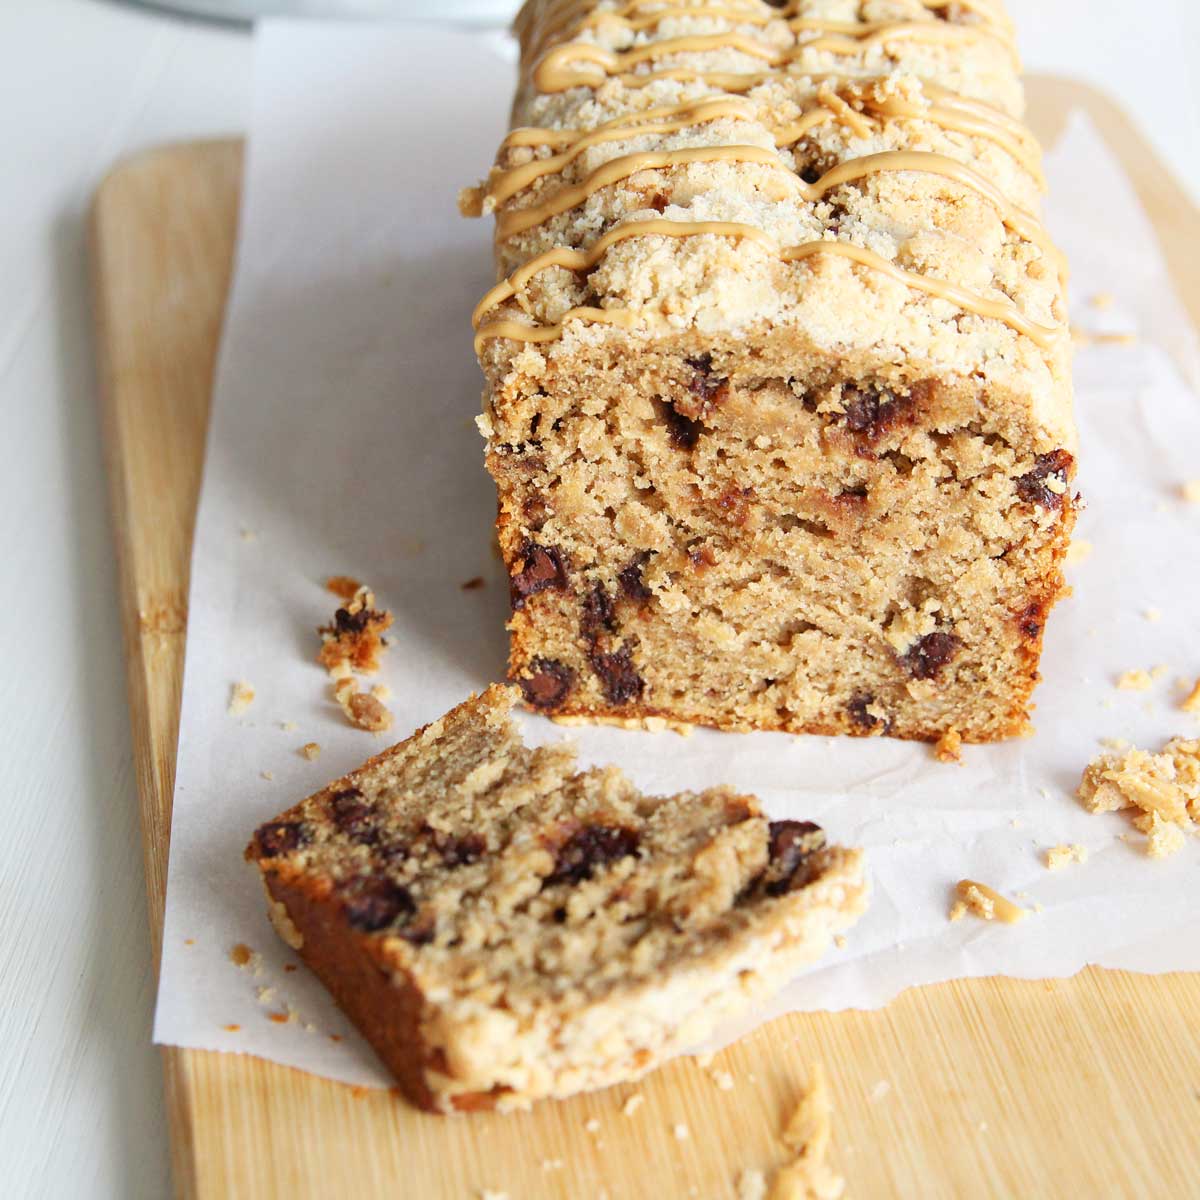 Coffee Lover's Chocolate Chip Banana Bread (No Eggs, Butter, or Dairy) - Peanut Butter Banana Bread